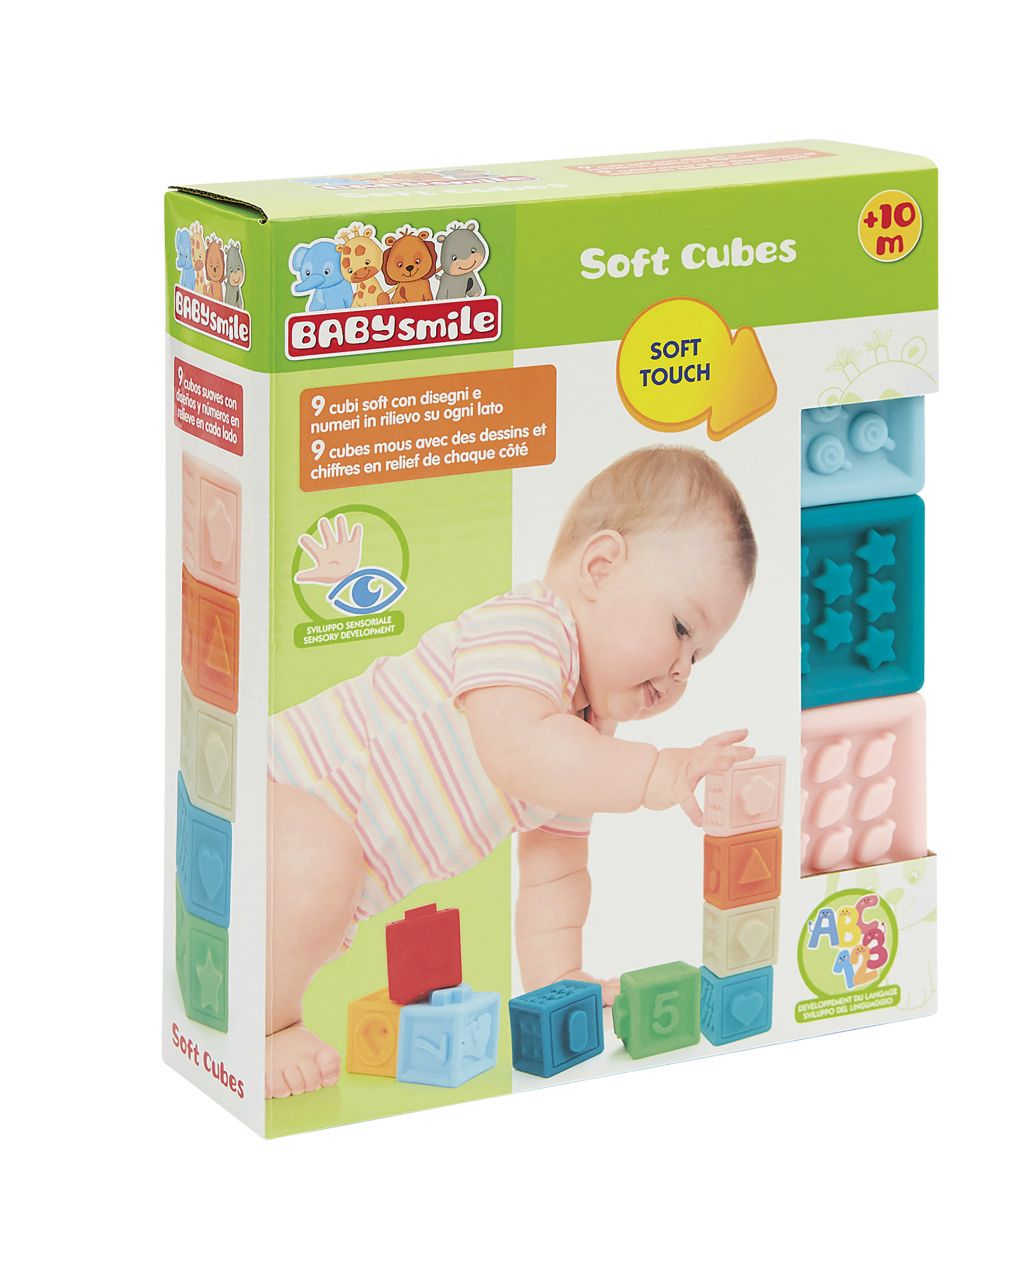 Baby smile - cubi soft - Baby Smile